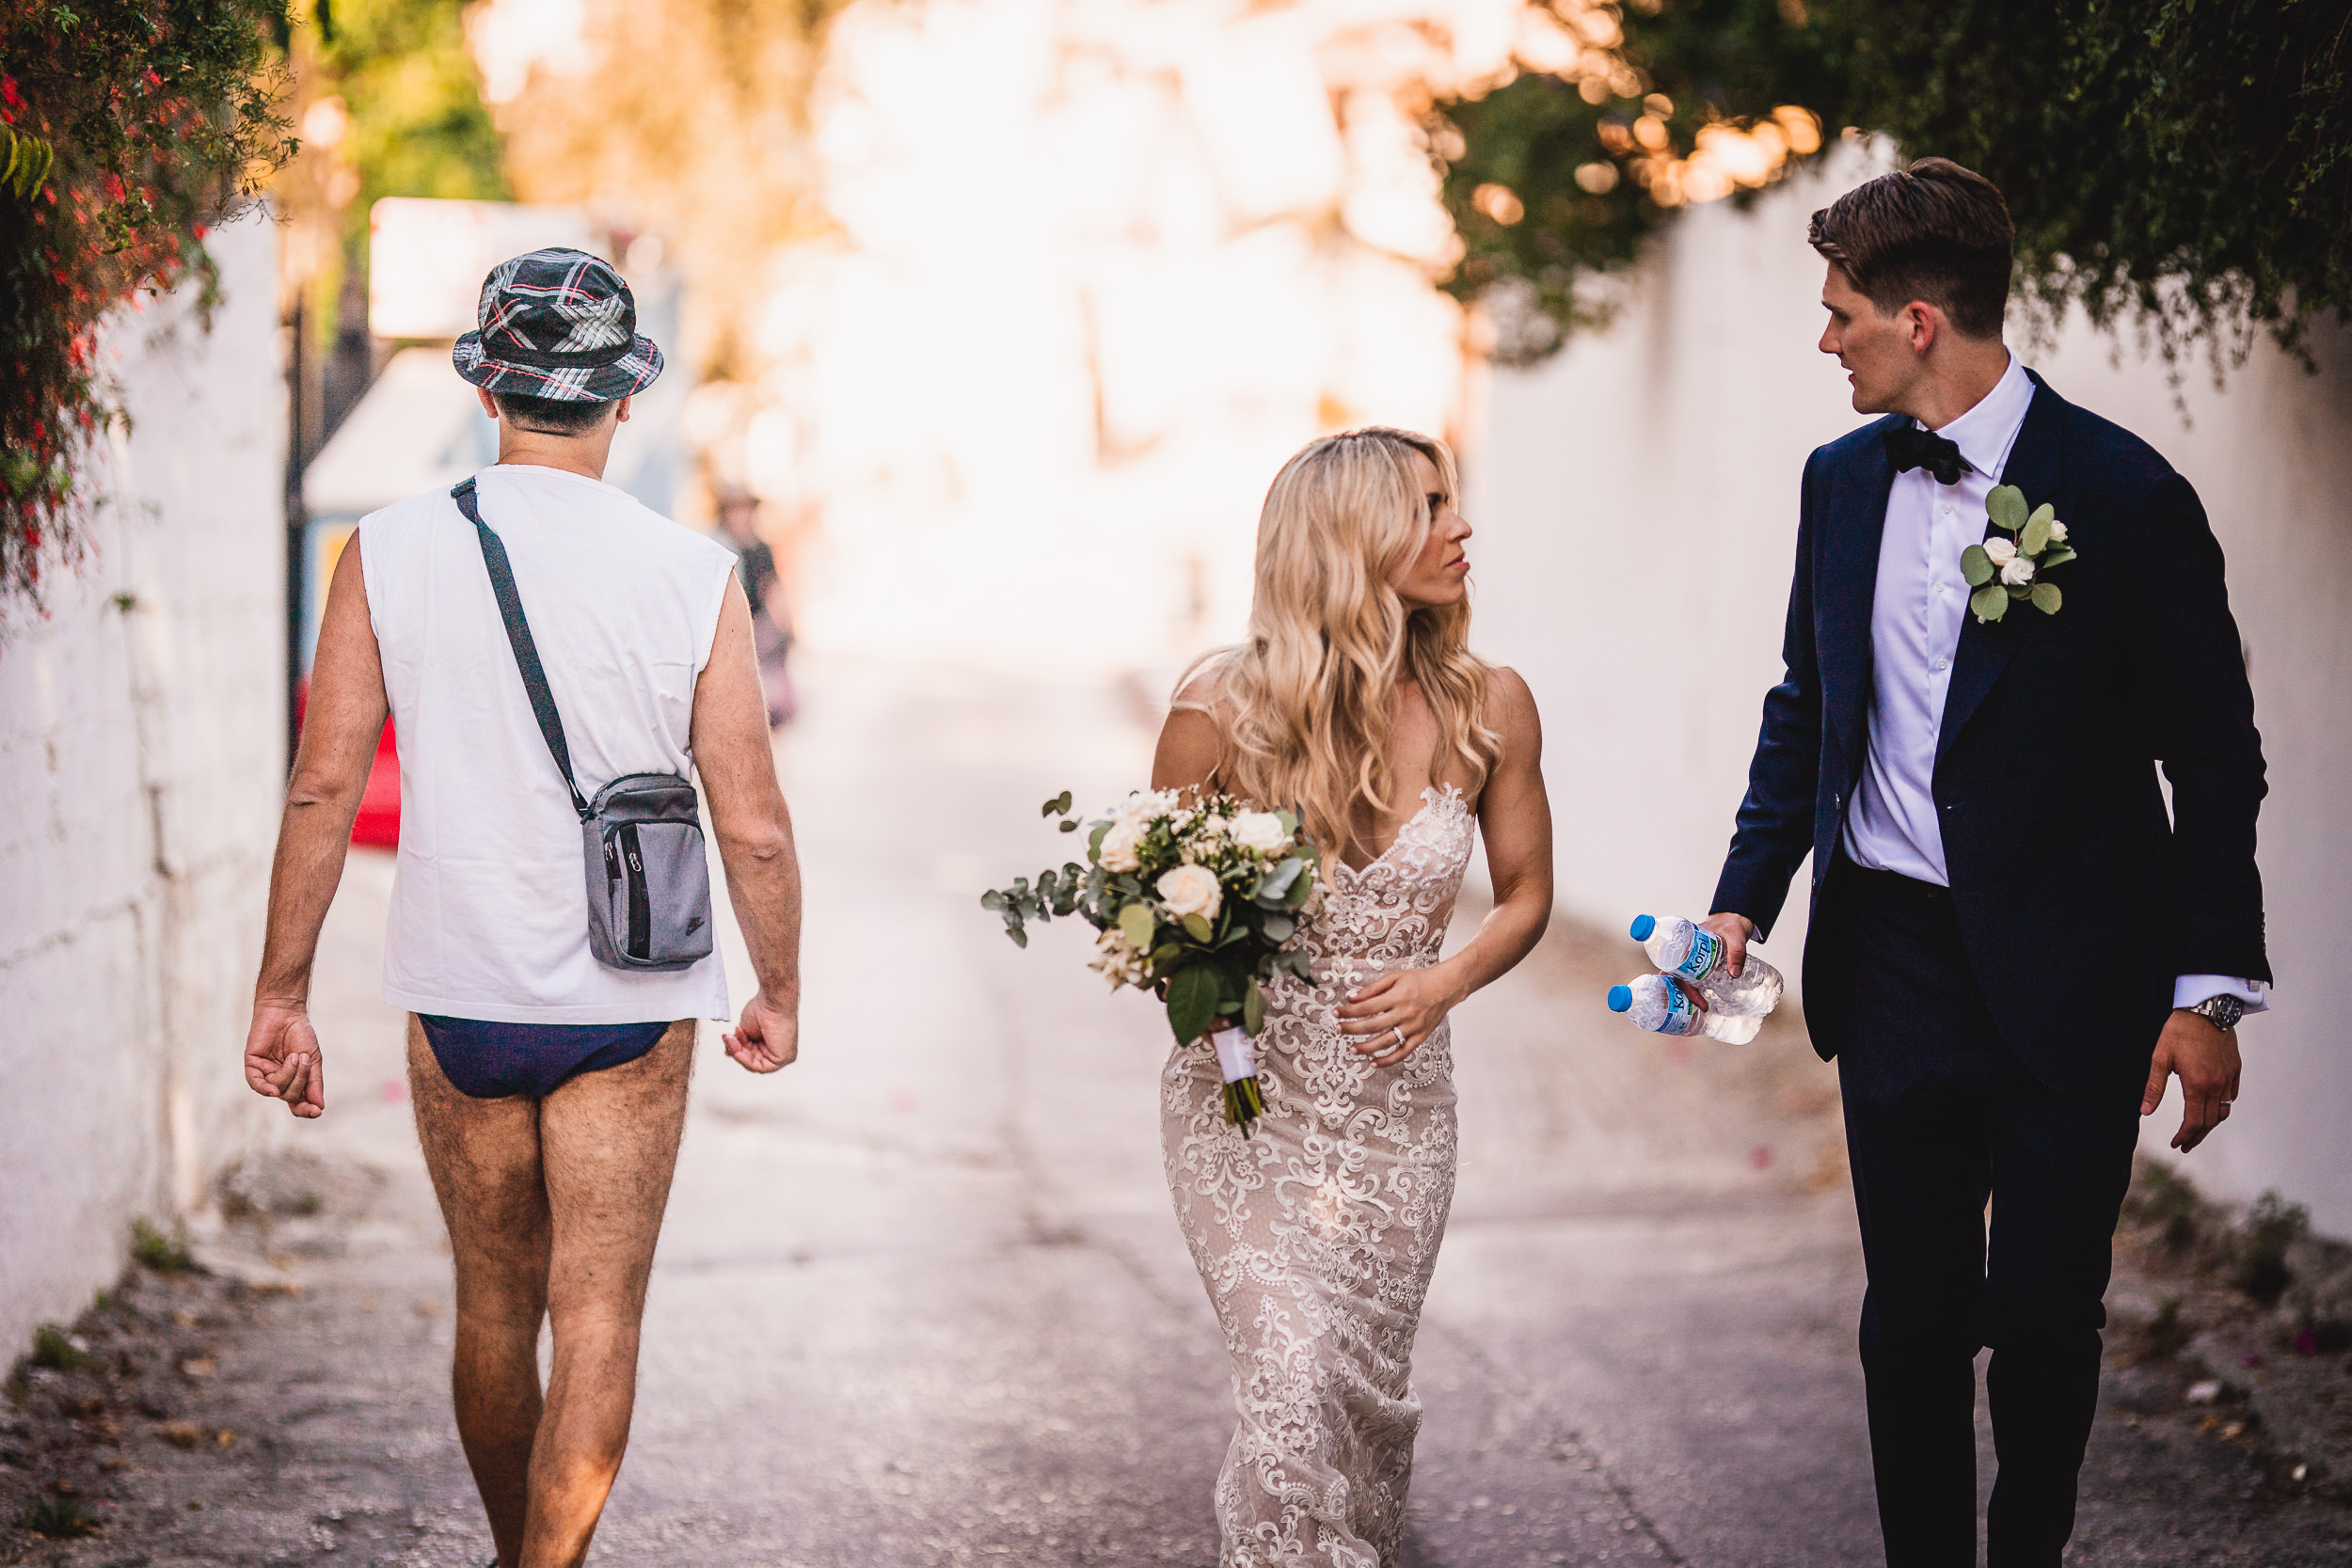 A bride and groom captured by their wedding photographer during a stroll.